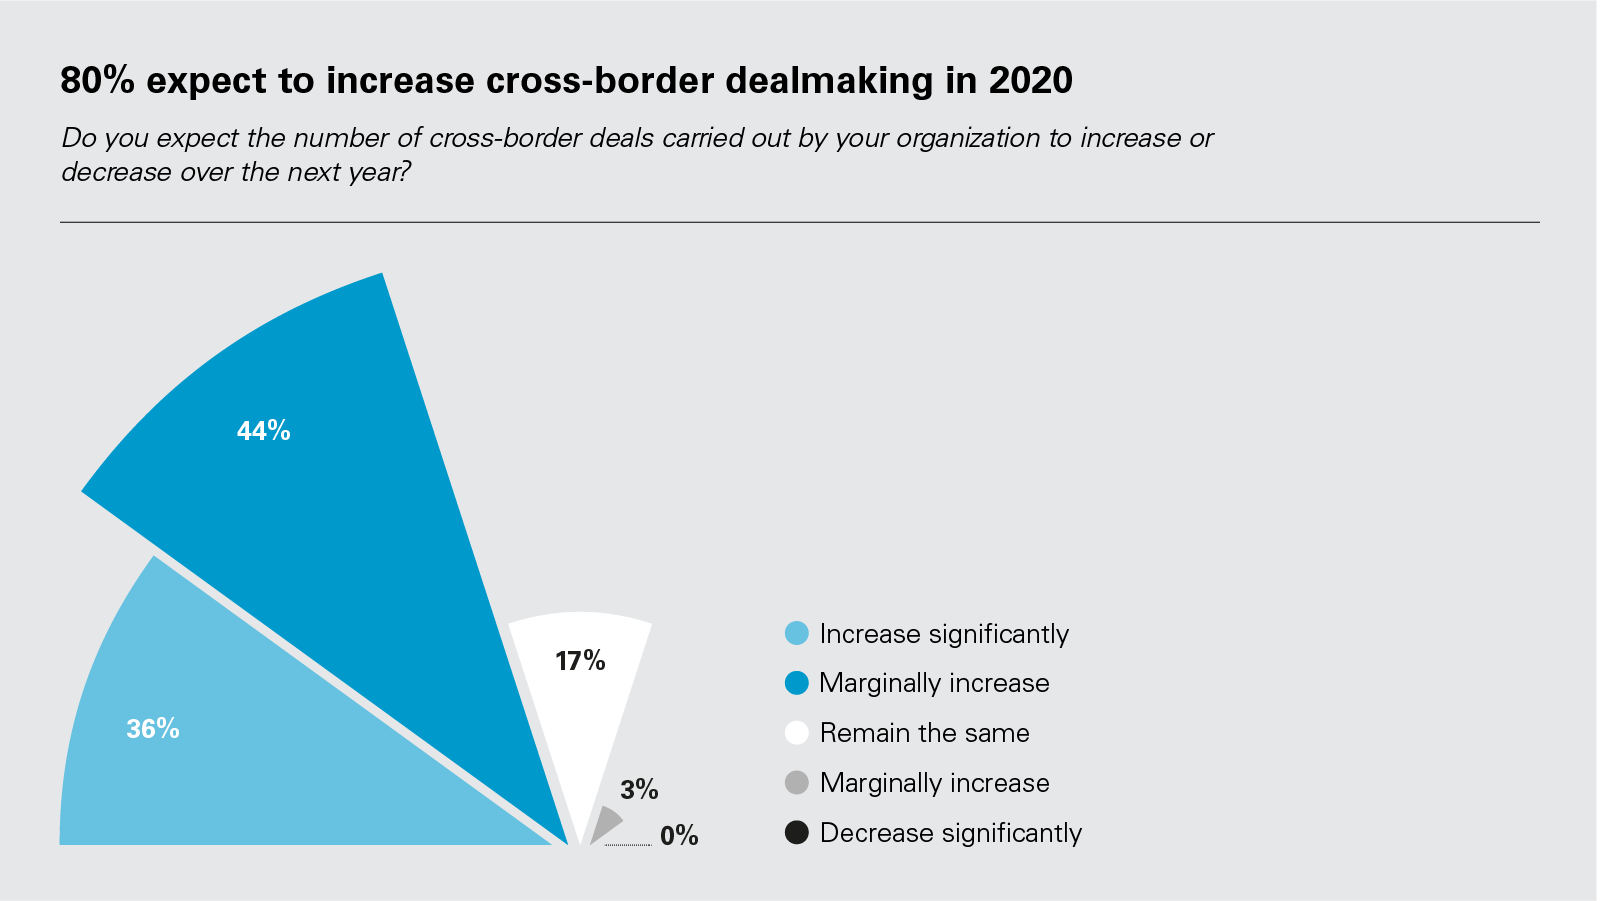 80% expect to increase cross-border dealmaking in 2020 